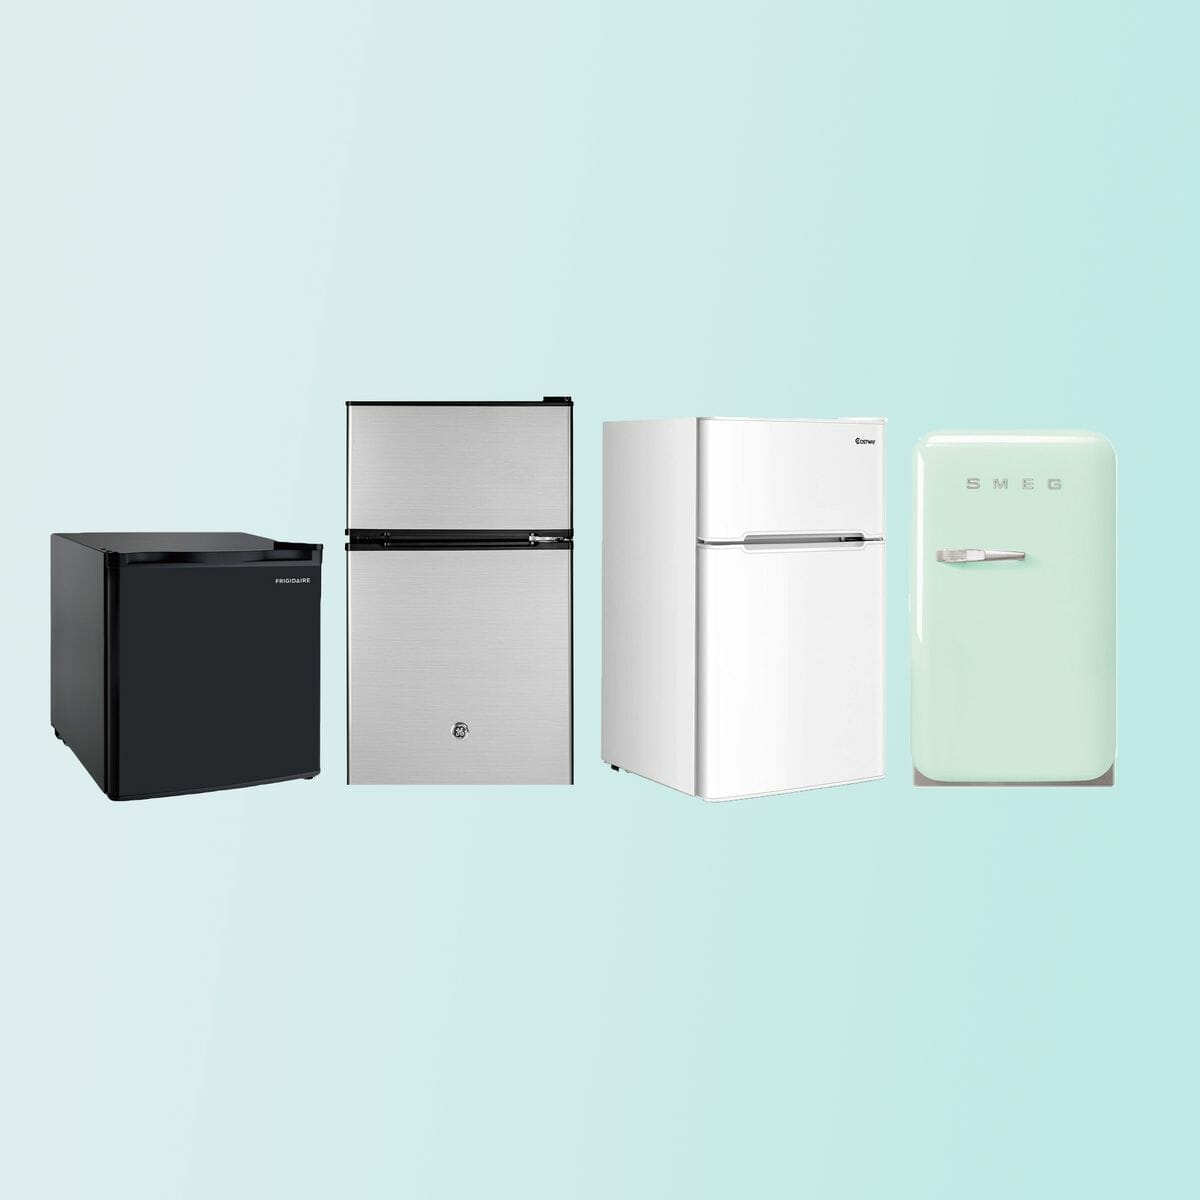 What's The Ideal Humidity For Mini Fridges?